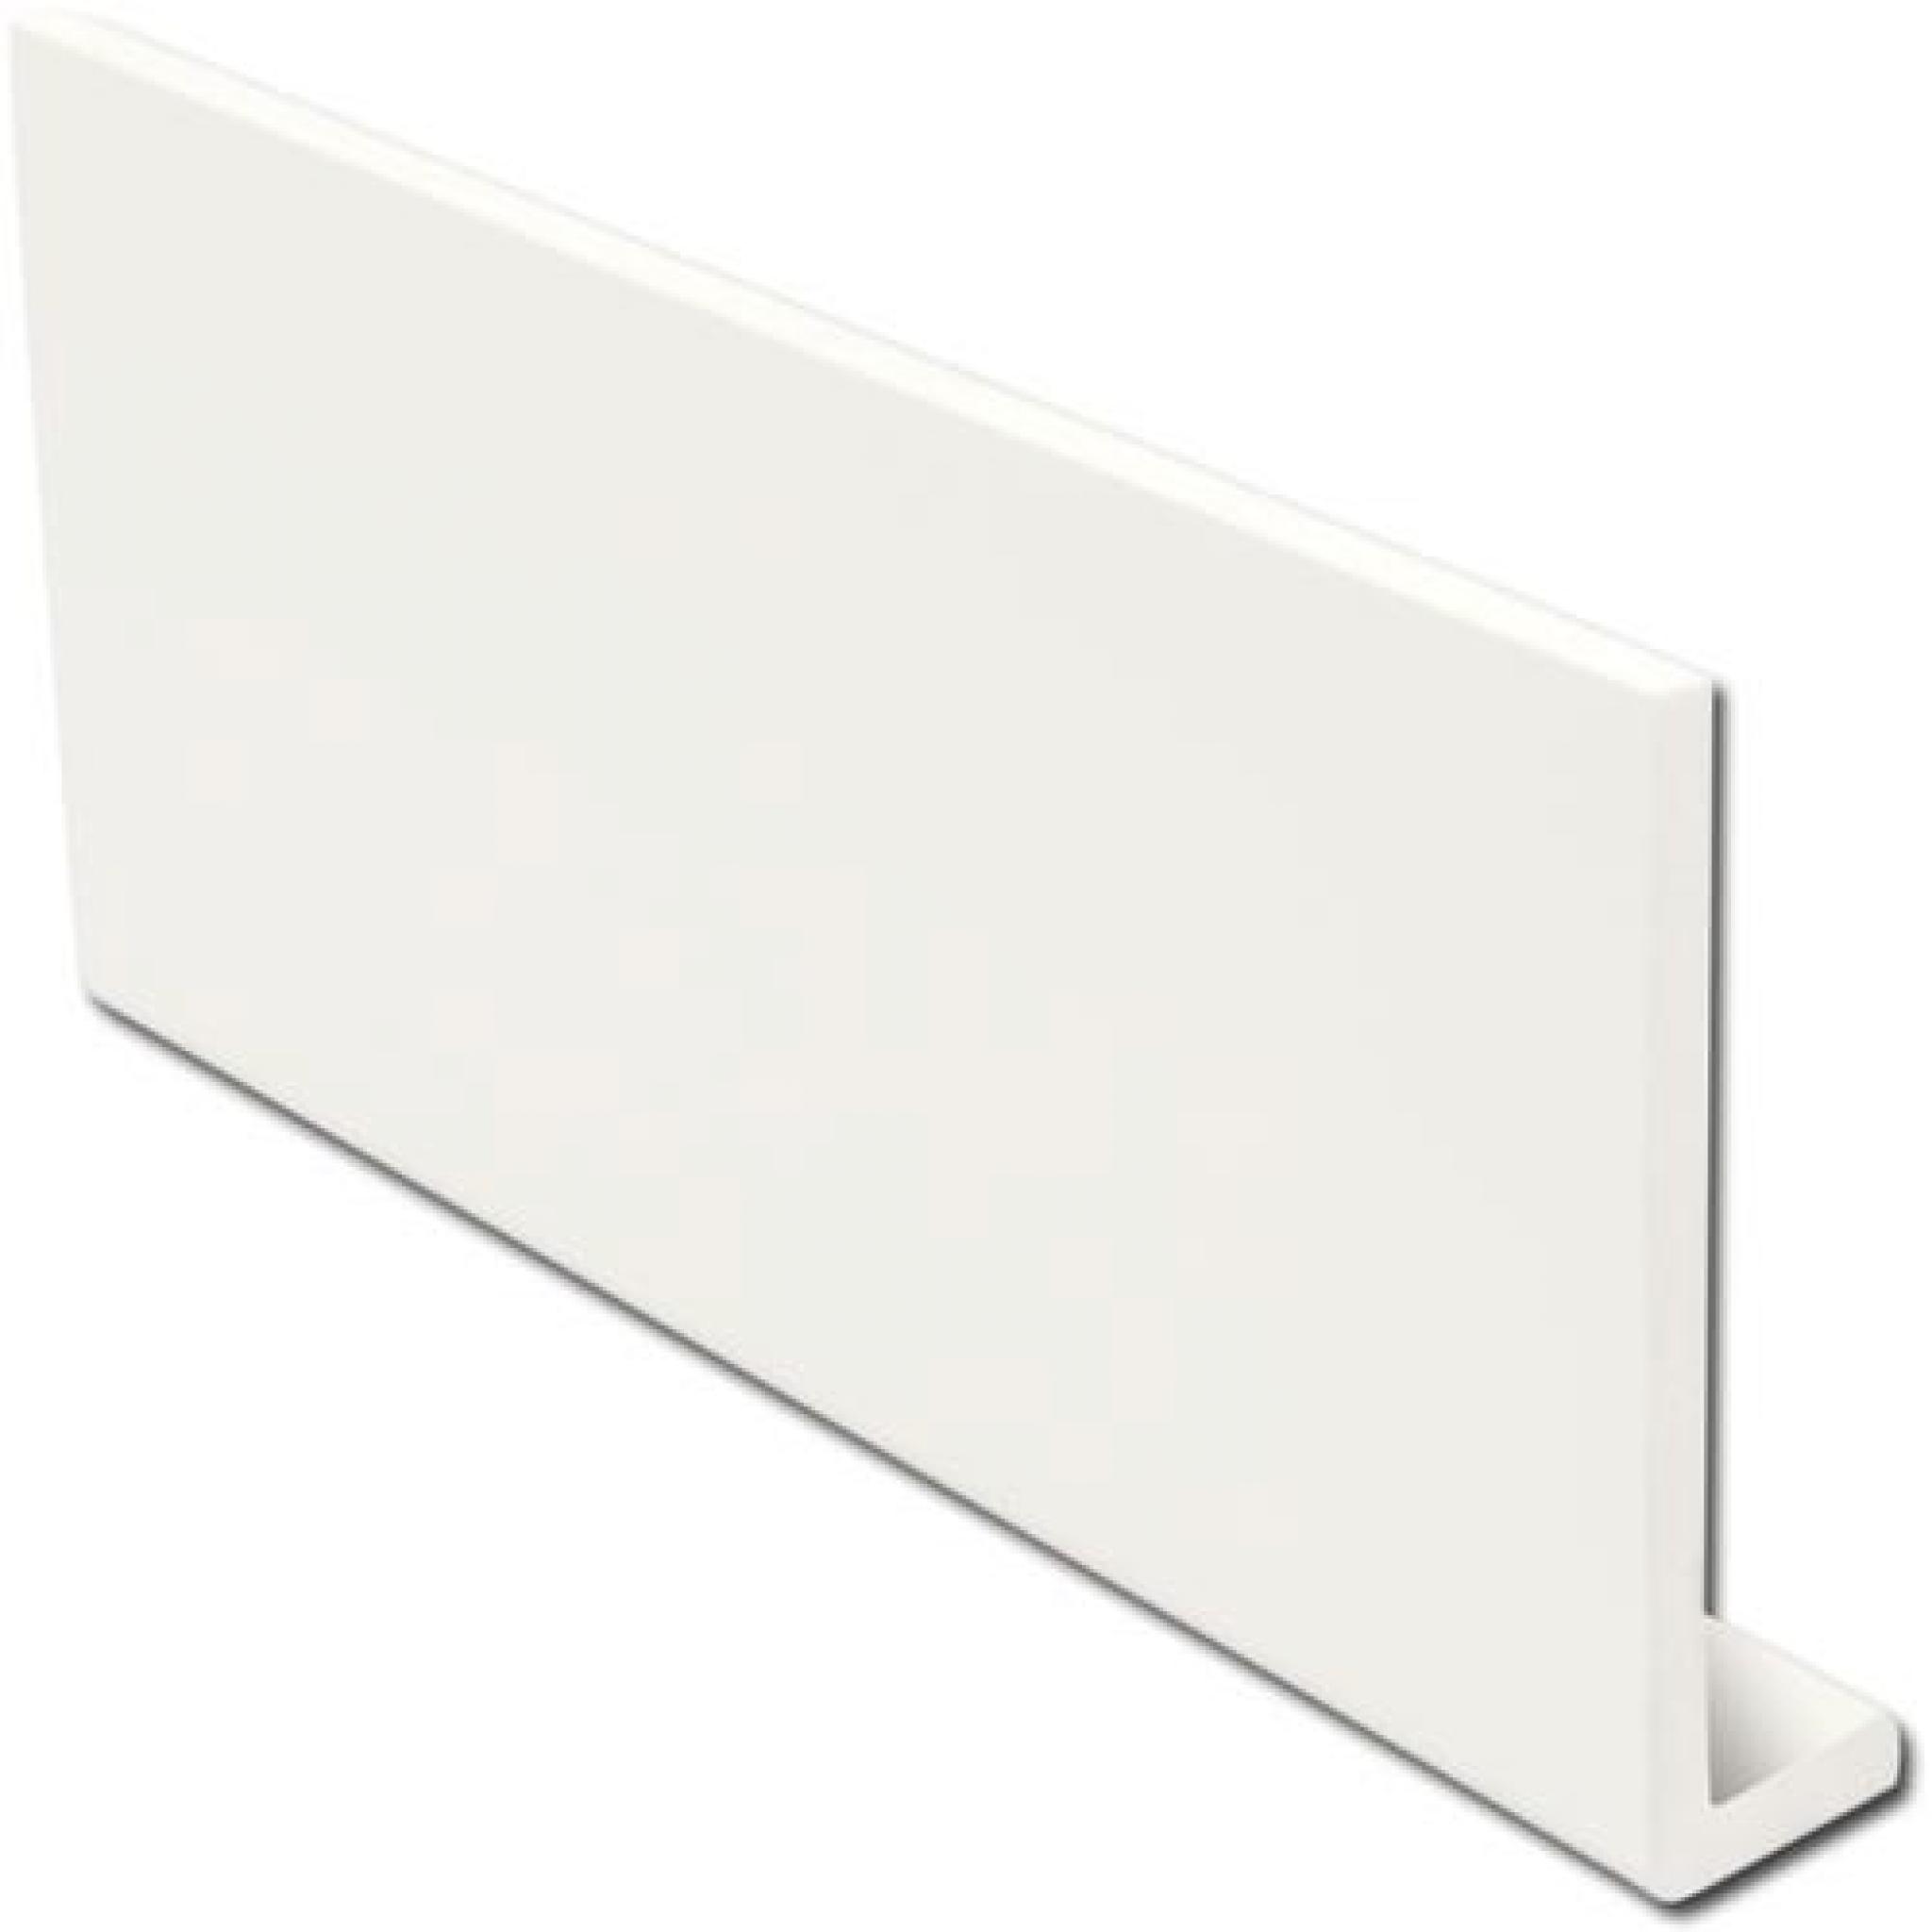 3 x 250mm 5m Capping Board Eurocell Upvc Cill Fascia Boards 9mm White 